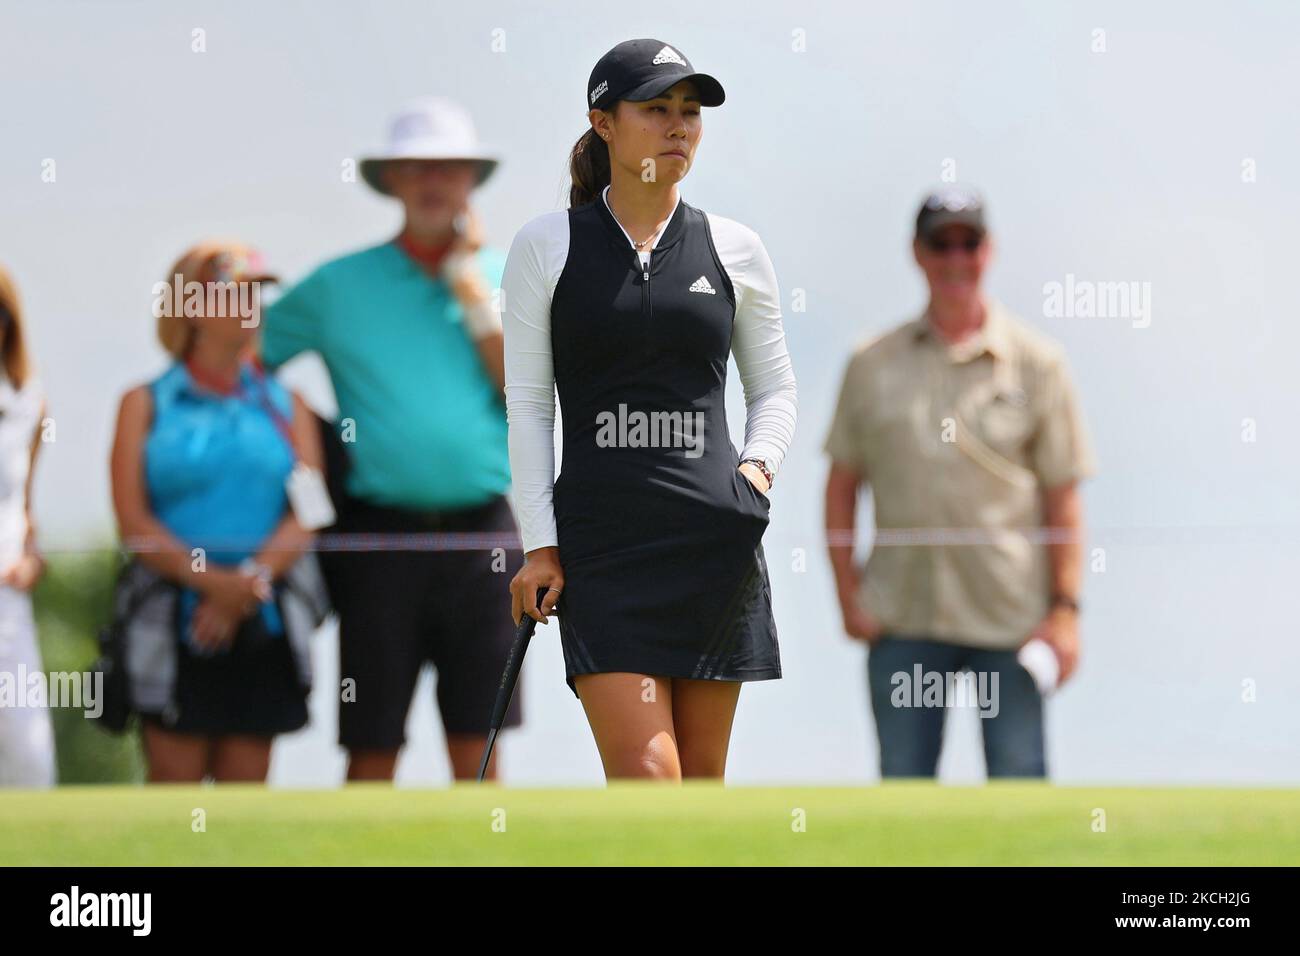 Danielle Kang of Las Vegas, Nevada waits her turn to putt on the 9th green during the second round of the Marathon LPGA Classic golf tournament at Highland Meadows Golf Club in Sylvania, Ohio, USA Friday, July 9, 2021. (Photo by Amy Lemus/NurPhoto) Stock Photo